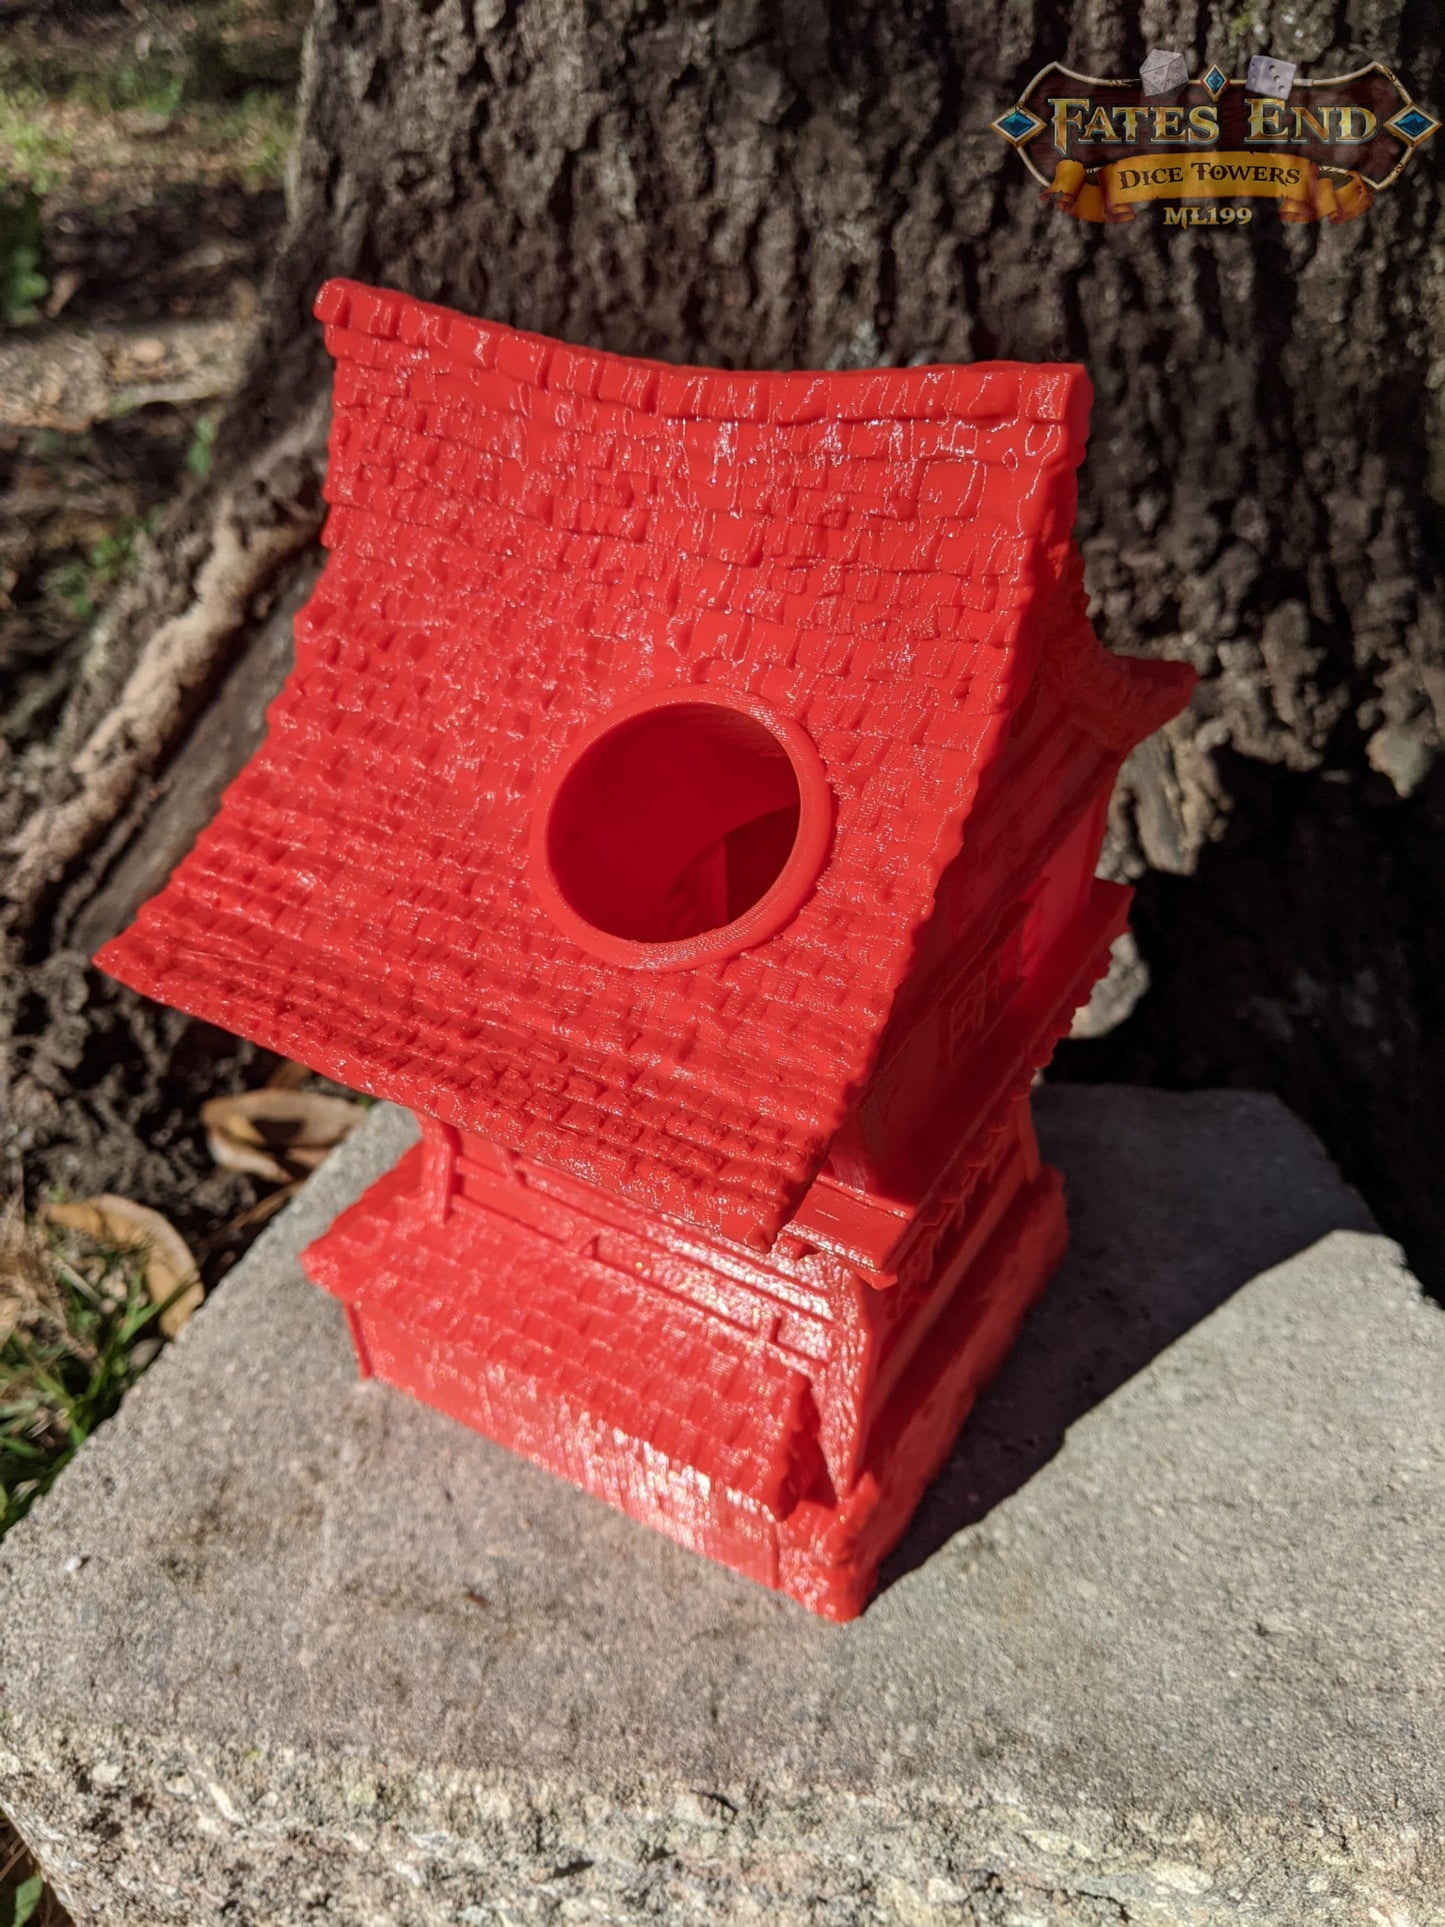 Rogue Class 3D Printed Dice Tower-Fate's End - Tabletop RPG Gaming Fantasy Cosplay - Where Shadows Conceal Destiny's Roll!